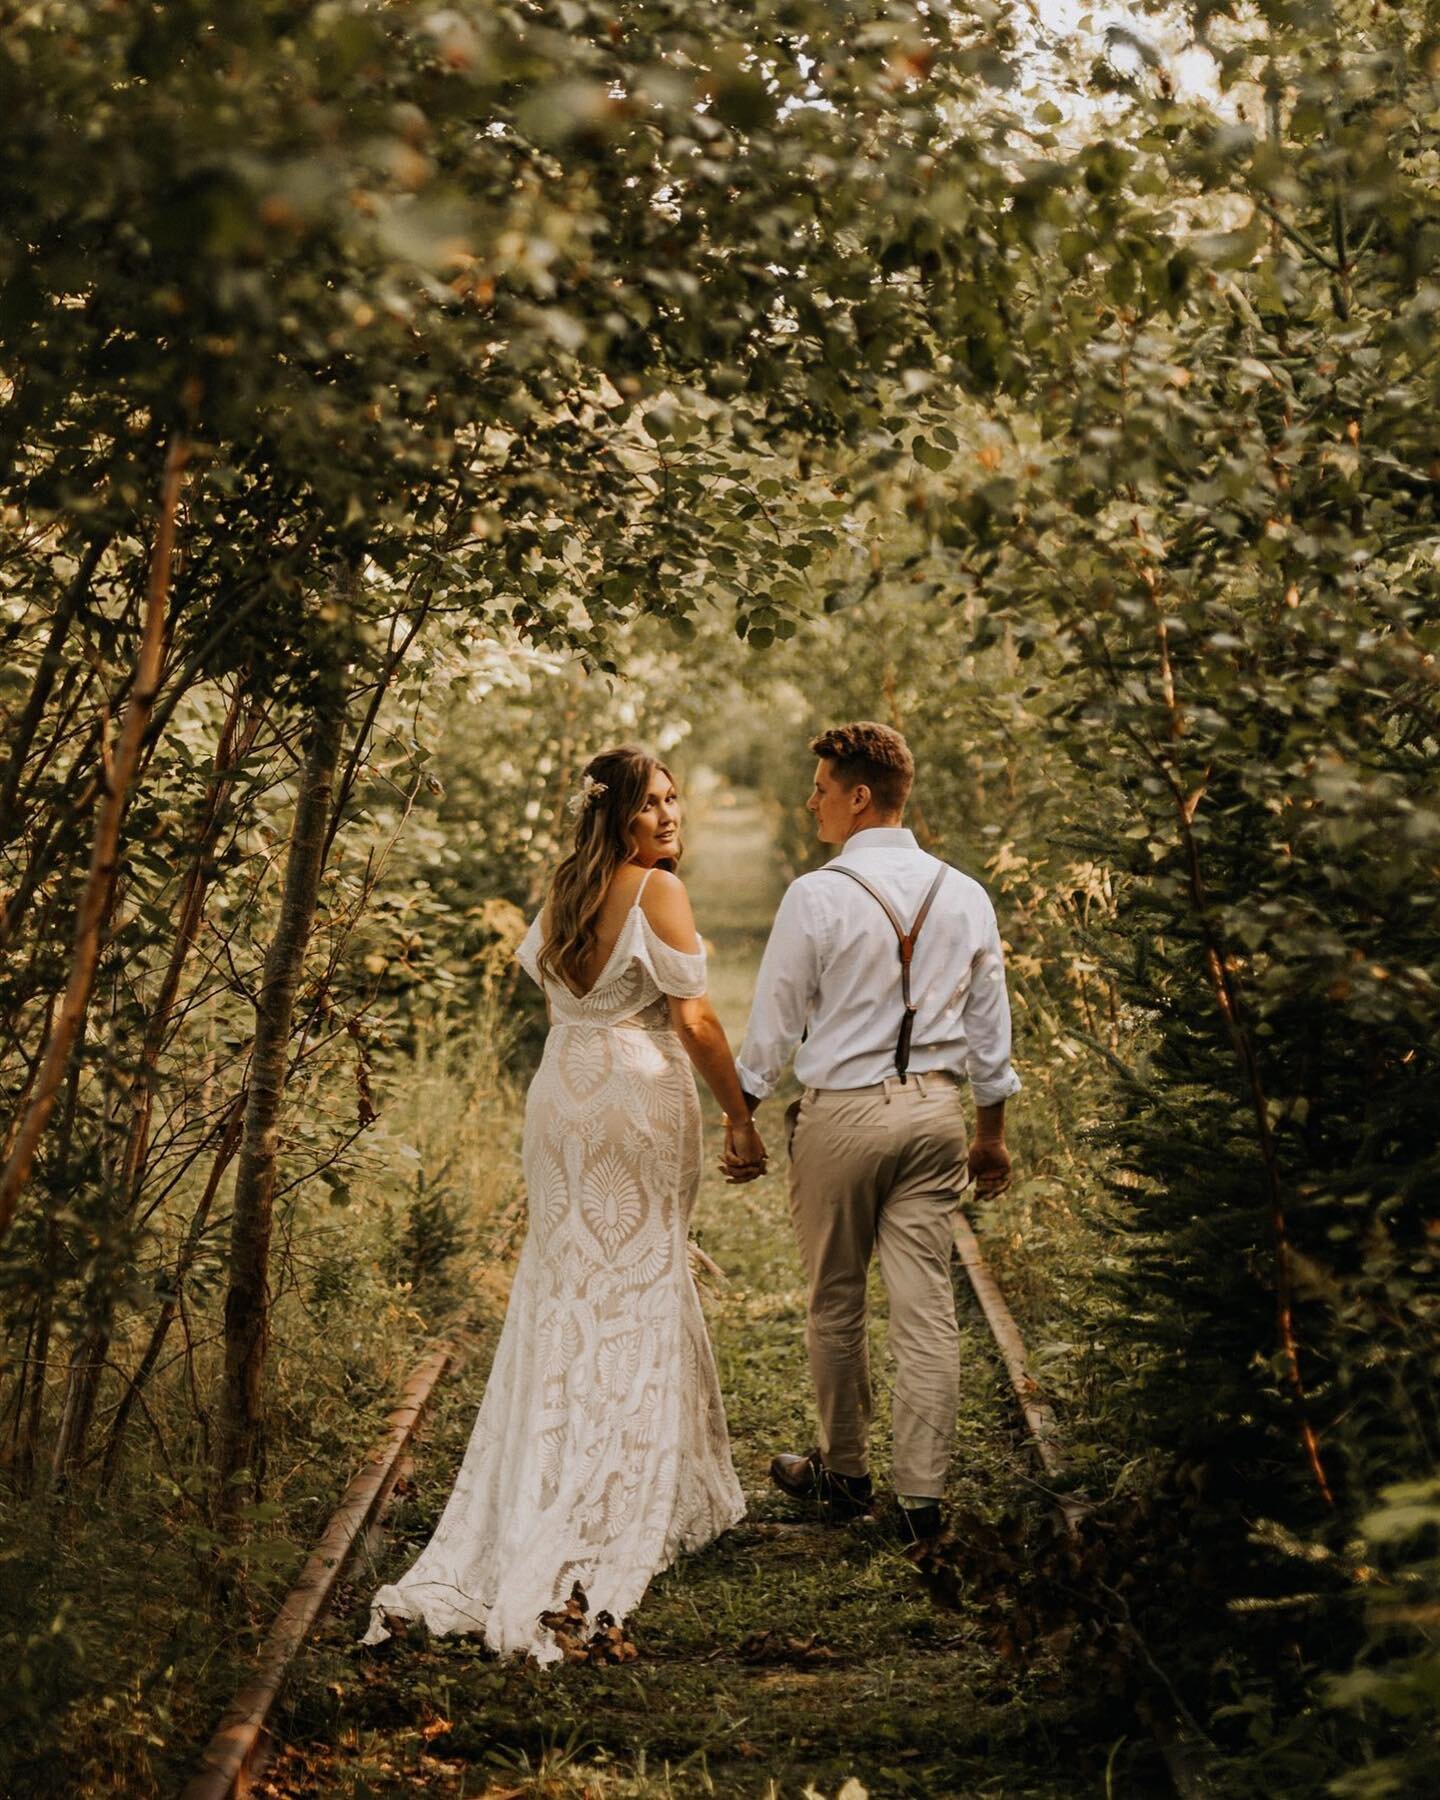 fluttery leaves dancing with the breeze and soft whispers post wedding ceremony ✨